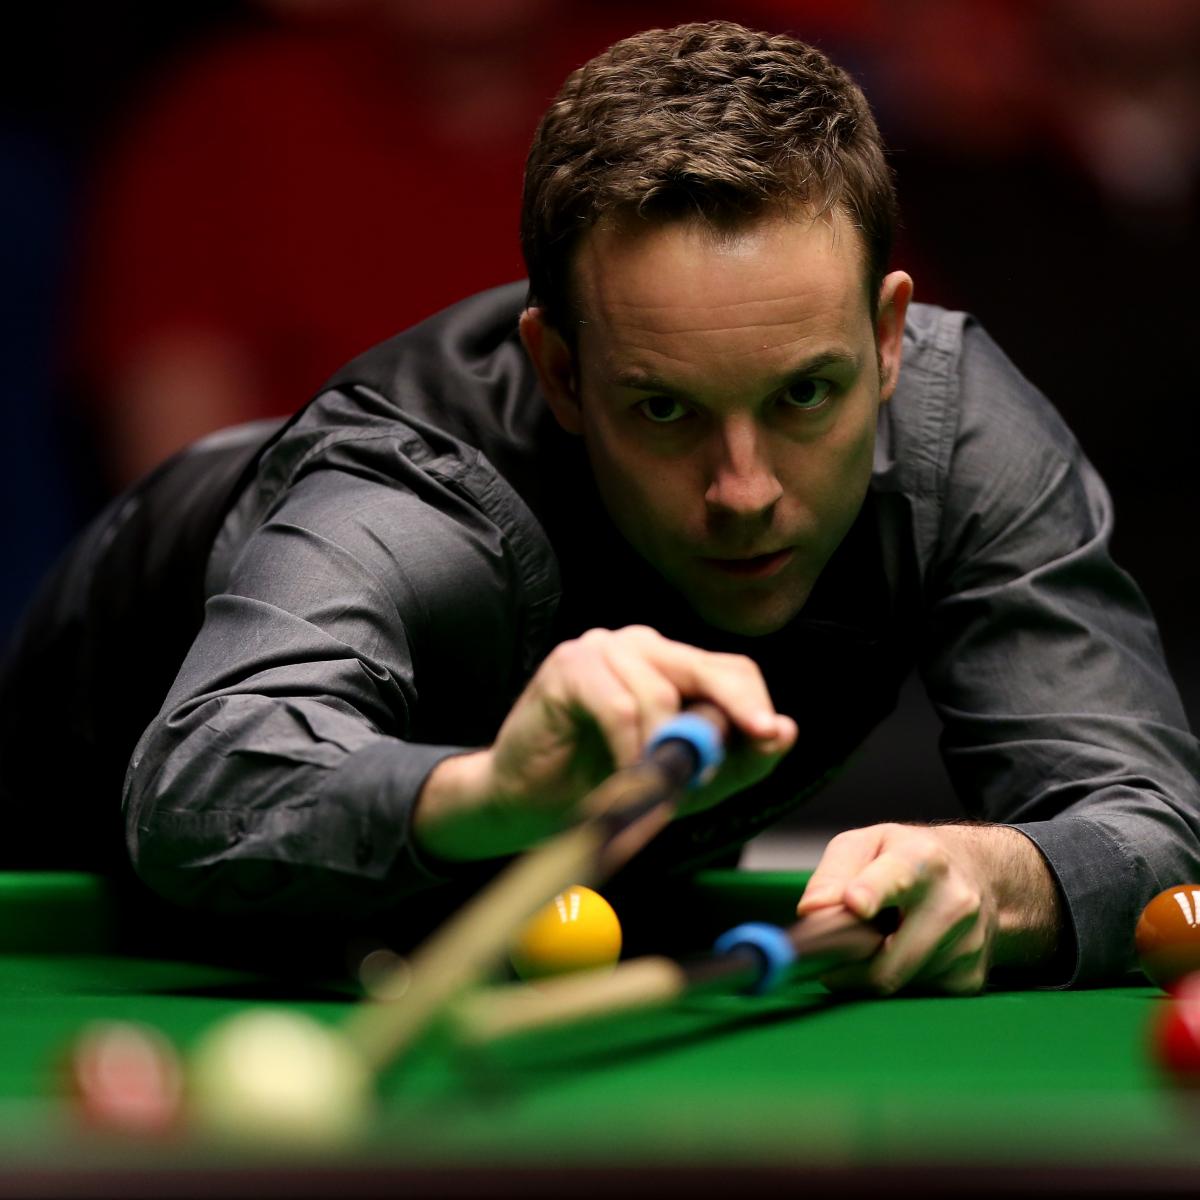 World Snooker Championship 2016 Results: Saturday's Scores and Updated